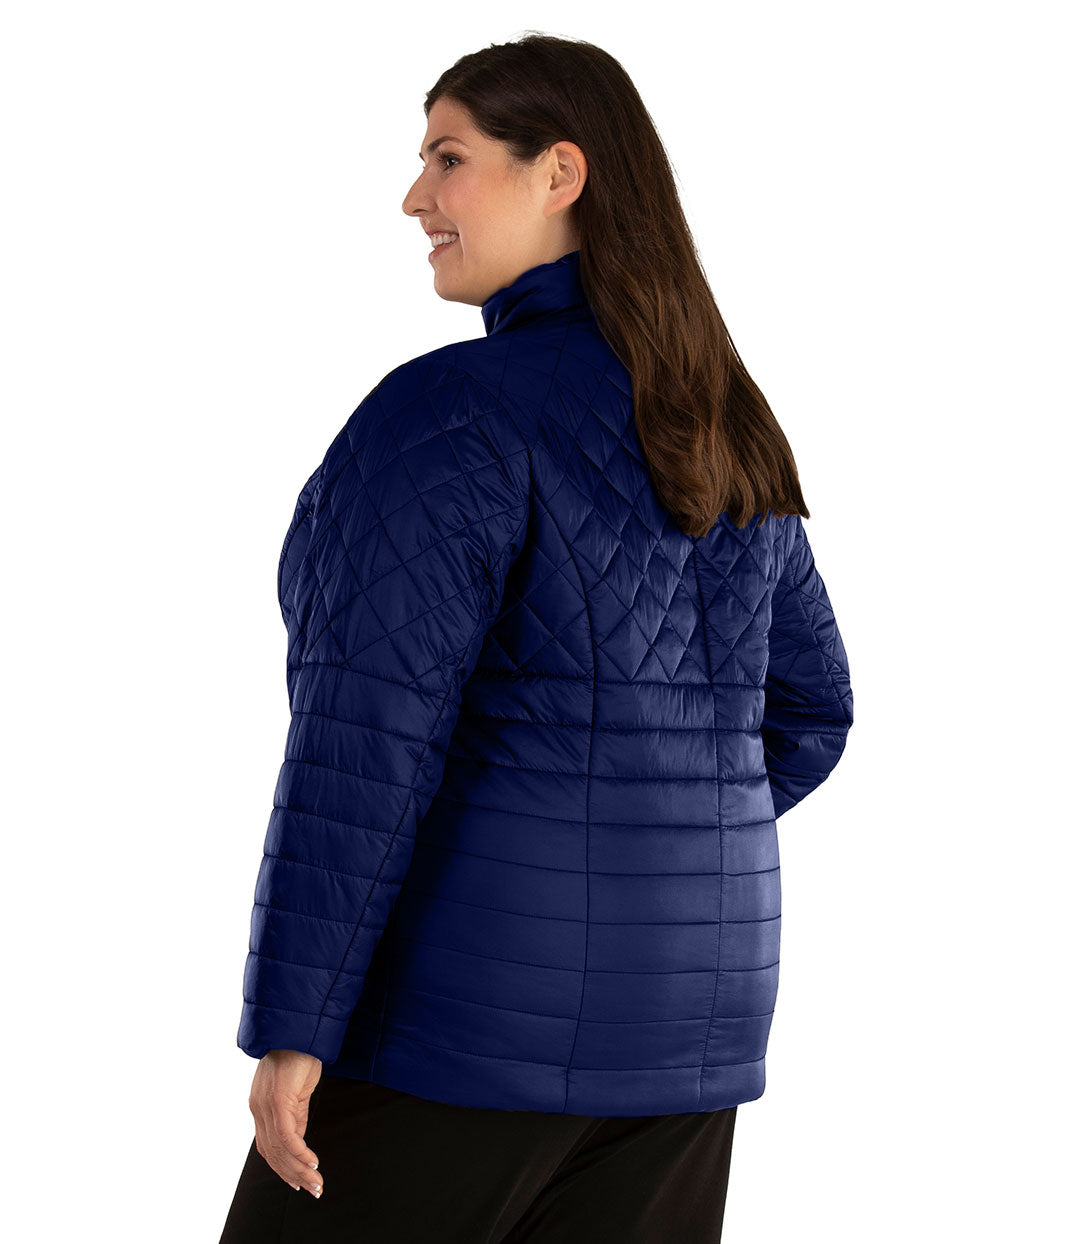 Plus size woman, back side view facing left, wearing a JunoActive plus size Quilted Active Length Jacket in Sapphire Blue. The jacket has a mock neck collar, zip front closure, and side pockets. Jacket quilting is a diamond pattern at the shoulders and horizontal lines at the lower half of the jacket. The length of the plus size jacket hits at the hips.